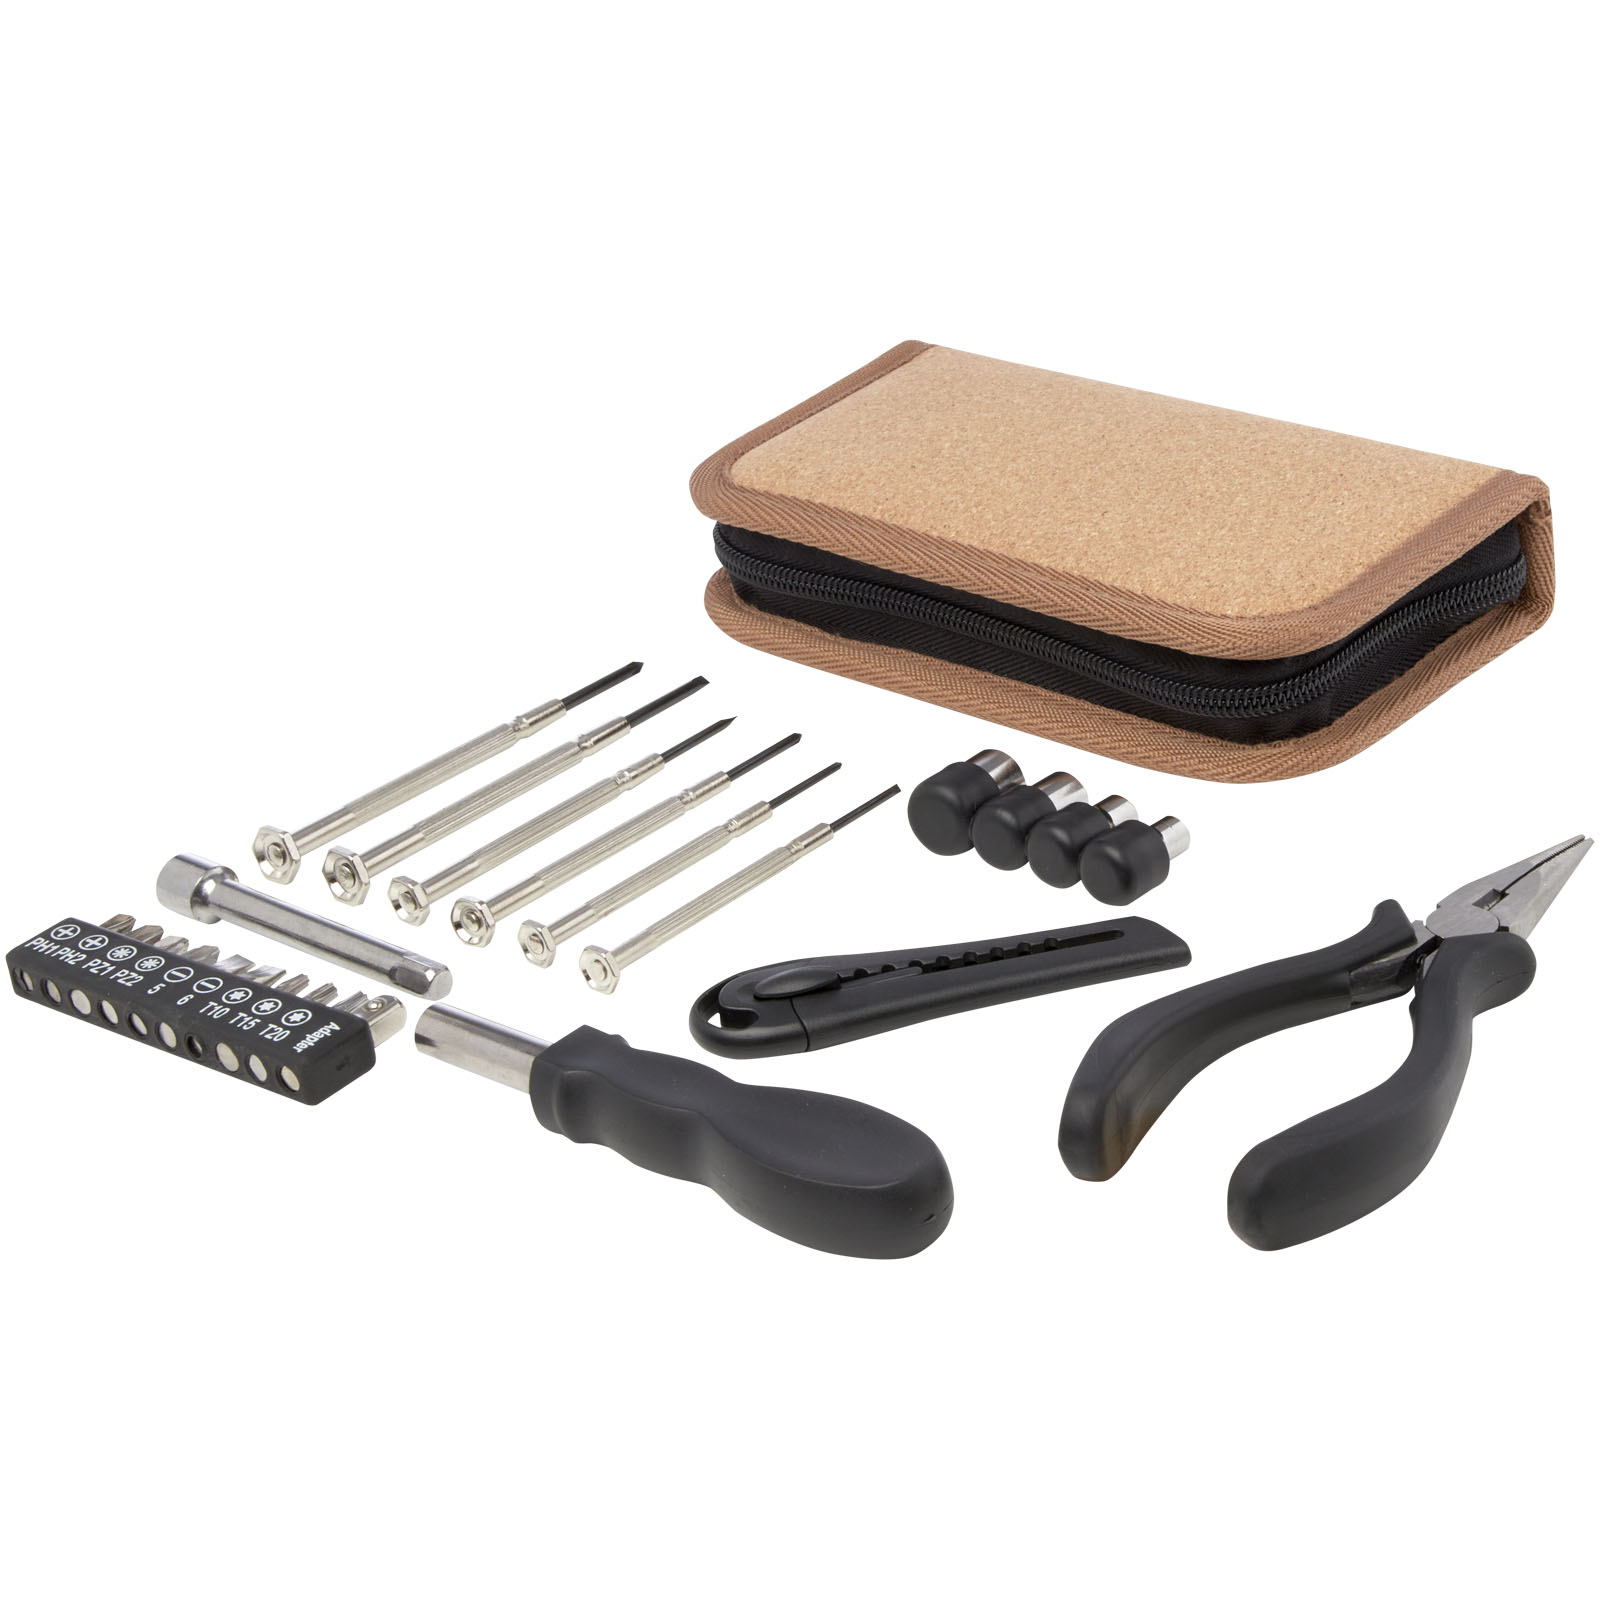 Advertising Tool sets - Spike 24-piece RCS recycled plastic tool set with cork pouch - 3